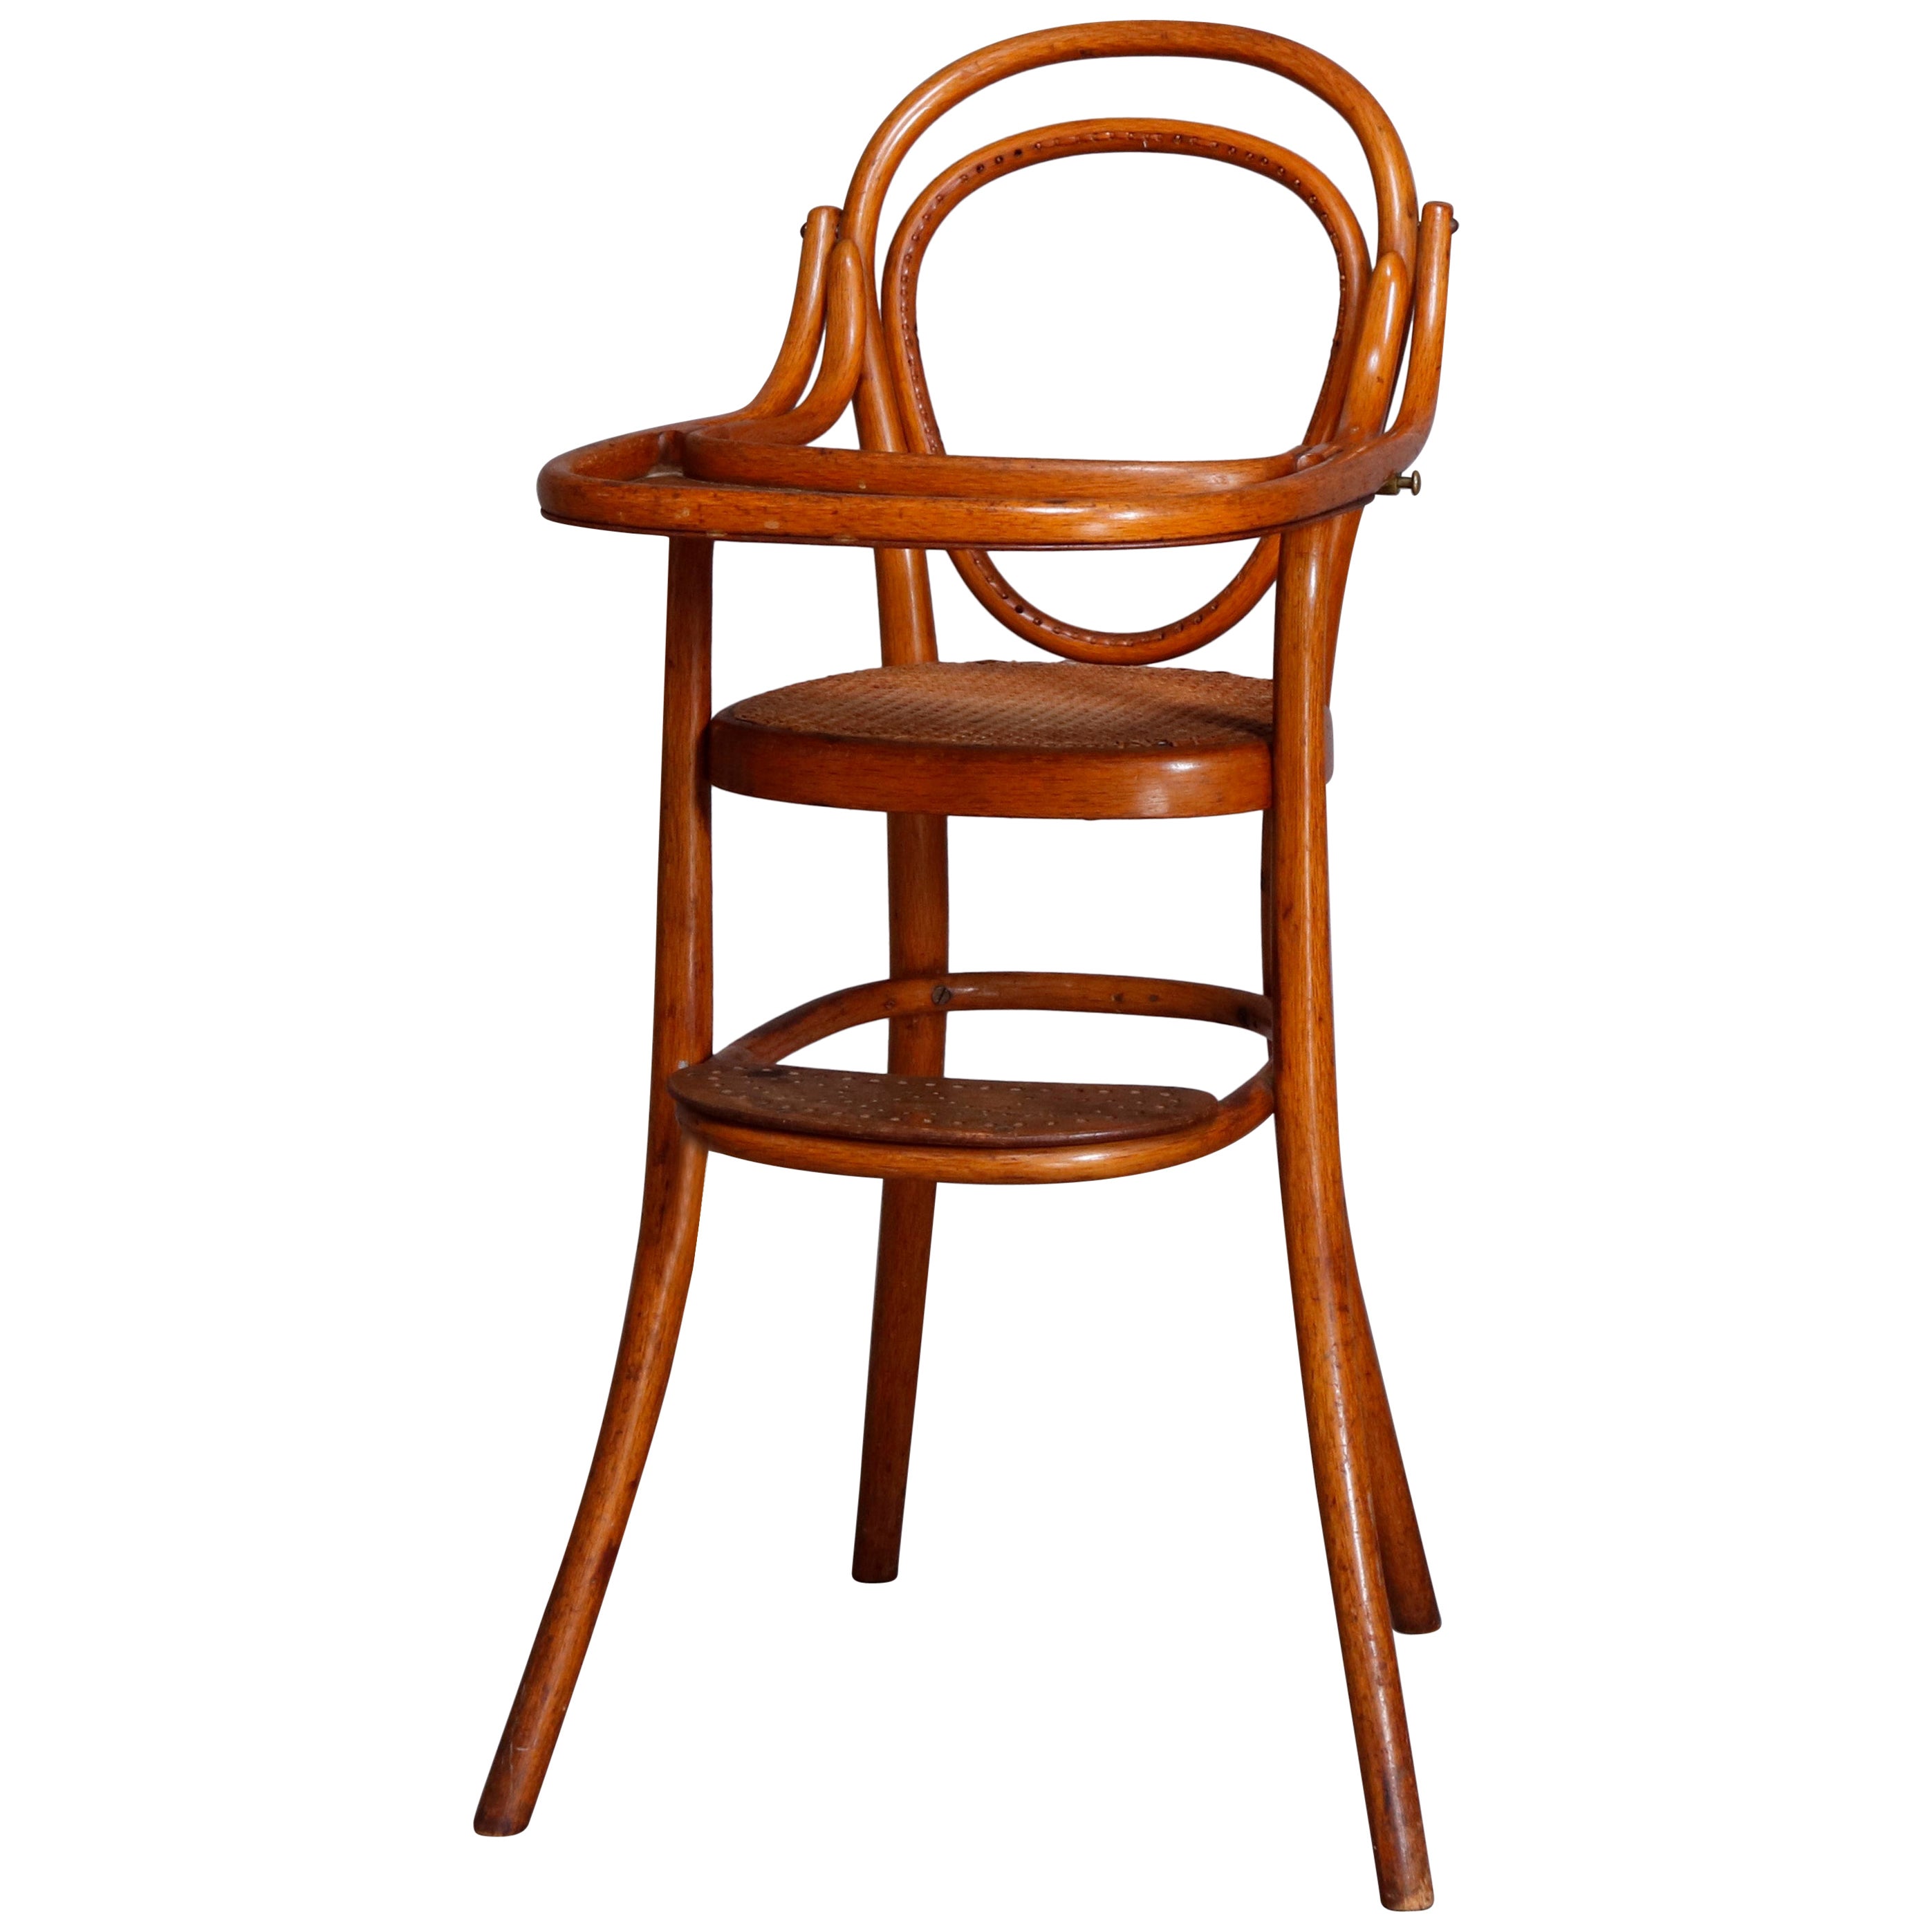 Model 17 Bentwood High Back Armchair by Michael Thonet For Sale at 1stDibs